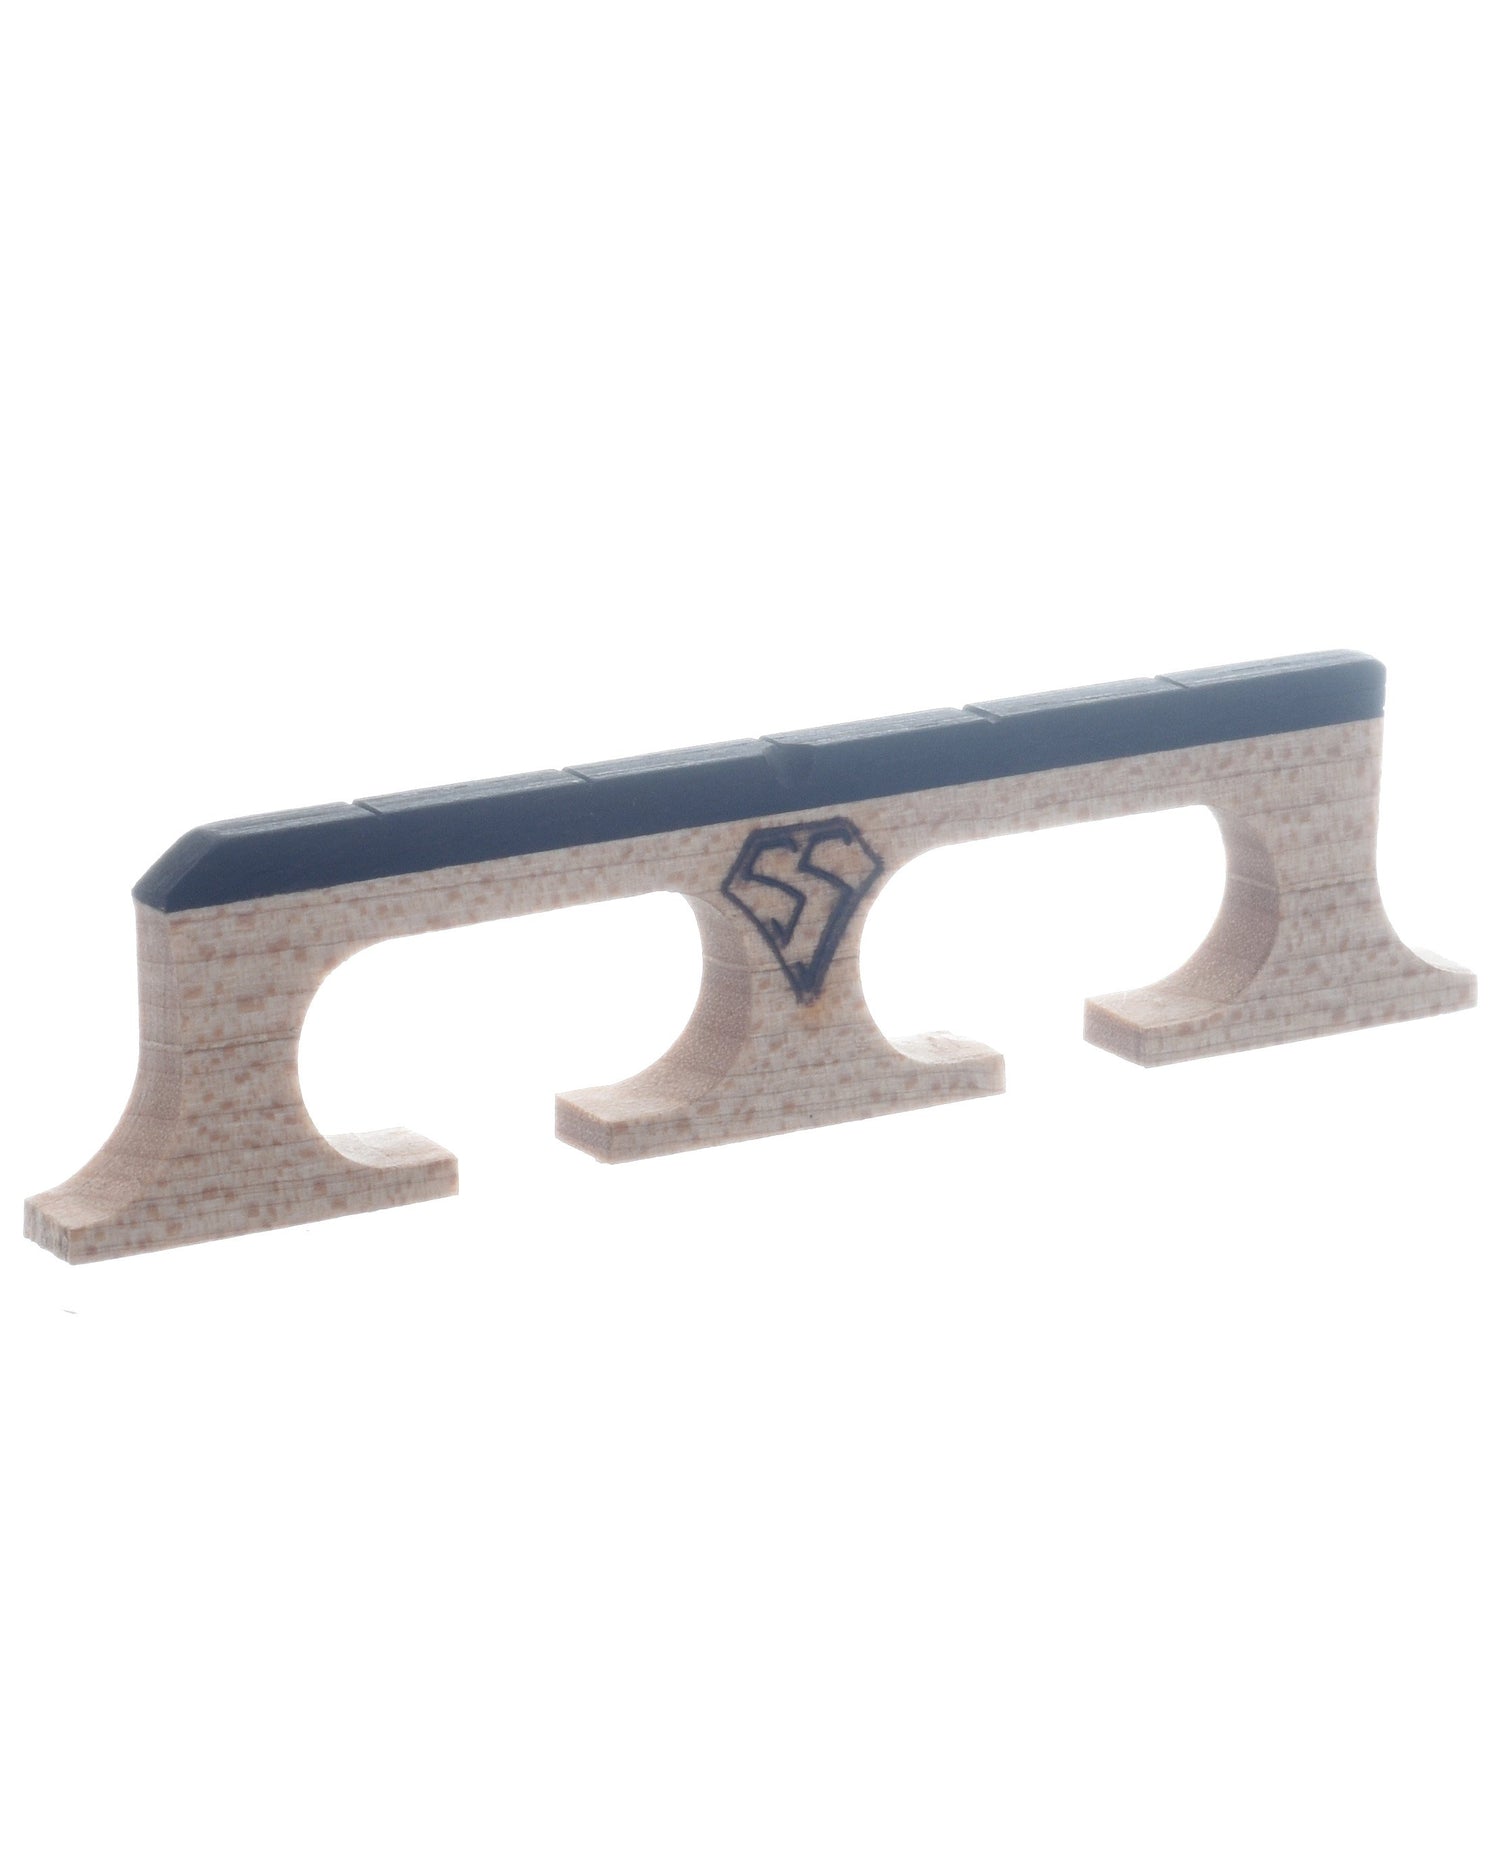 Image 1 of Snuffy Smith New Generation Banjo Bridge, Compensated 11/16" Standard Spaced - SKU# SSCOMP-11/16-S : Product Type Accessories & Parts : Elderly Instruments